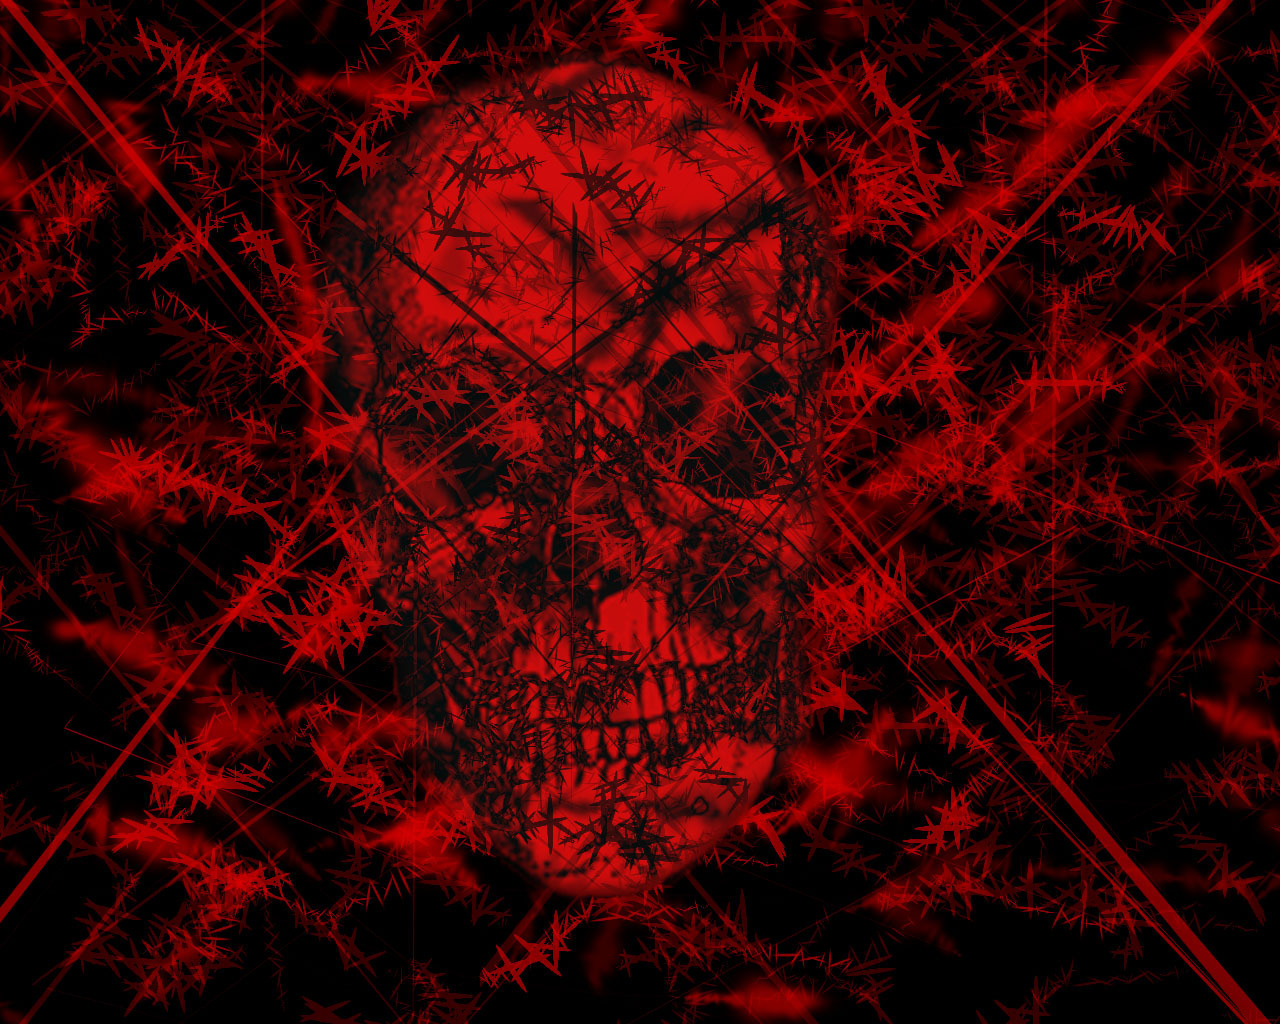 Gothic Achtergrond - Black And Red Skull - HD Wallpaper 